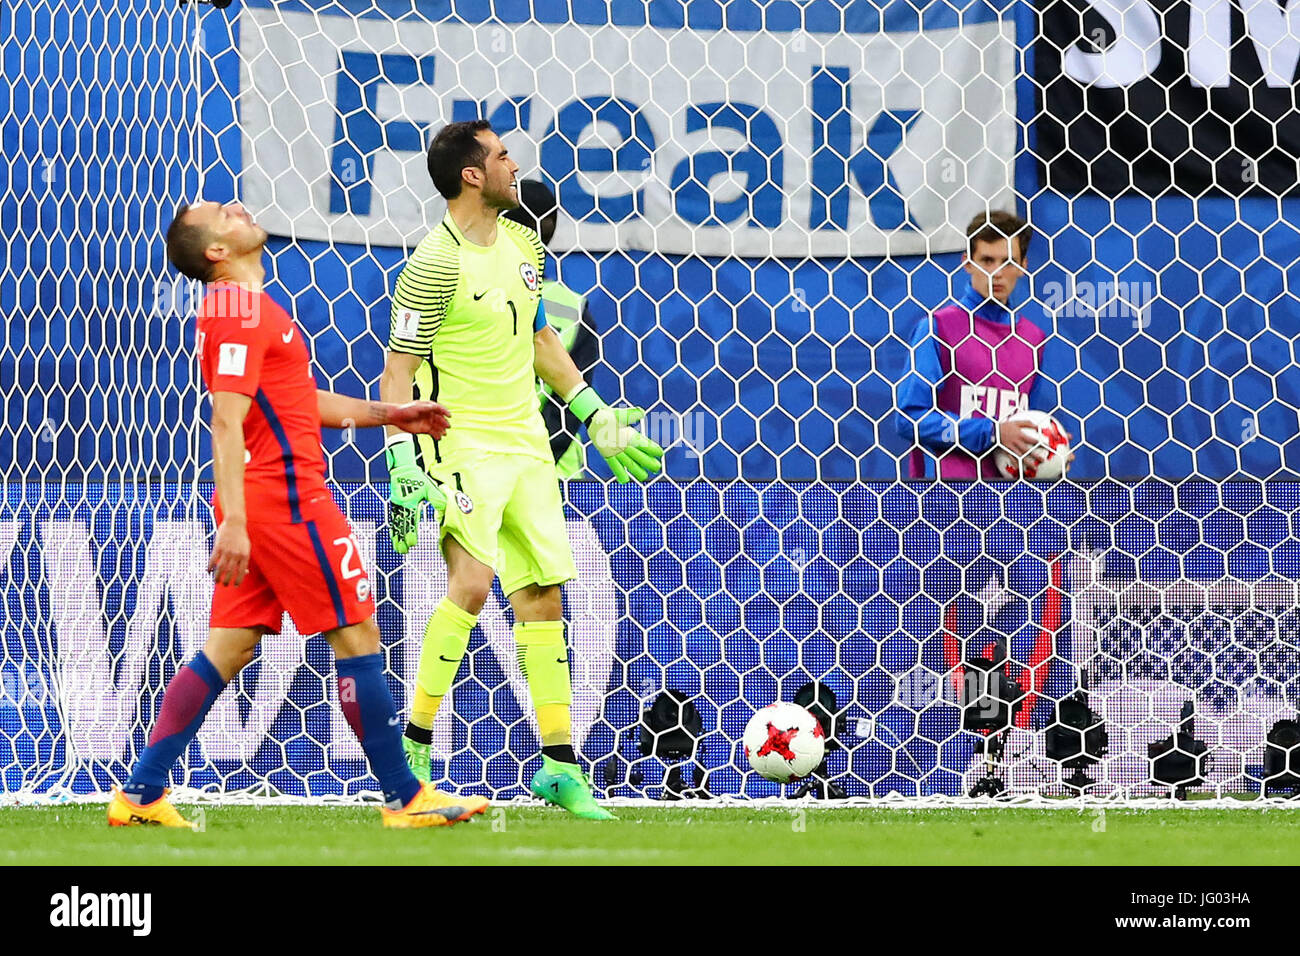 St Petersburg, Russia. 2nd July, 2017. CHILE VS GERMANY - Marcelo Diaz and Claudio Bravo of Chile regret the goal conceded during a match between Chile and Germany at the 2017 Confederations Cup Final this Sunday at the Krestovsky Stadium in St Petersburg, Russia. (Photo: Heuler Andrey/DiaEsportivo/Fotoarena/Alamy Live News) Stock Photo